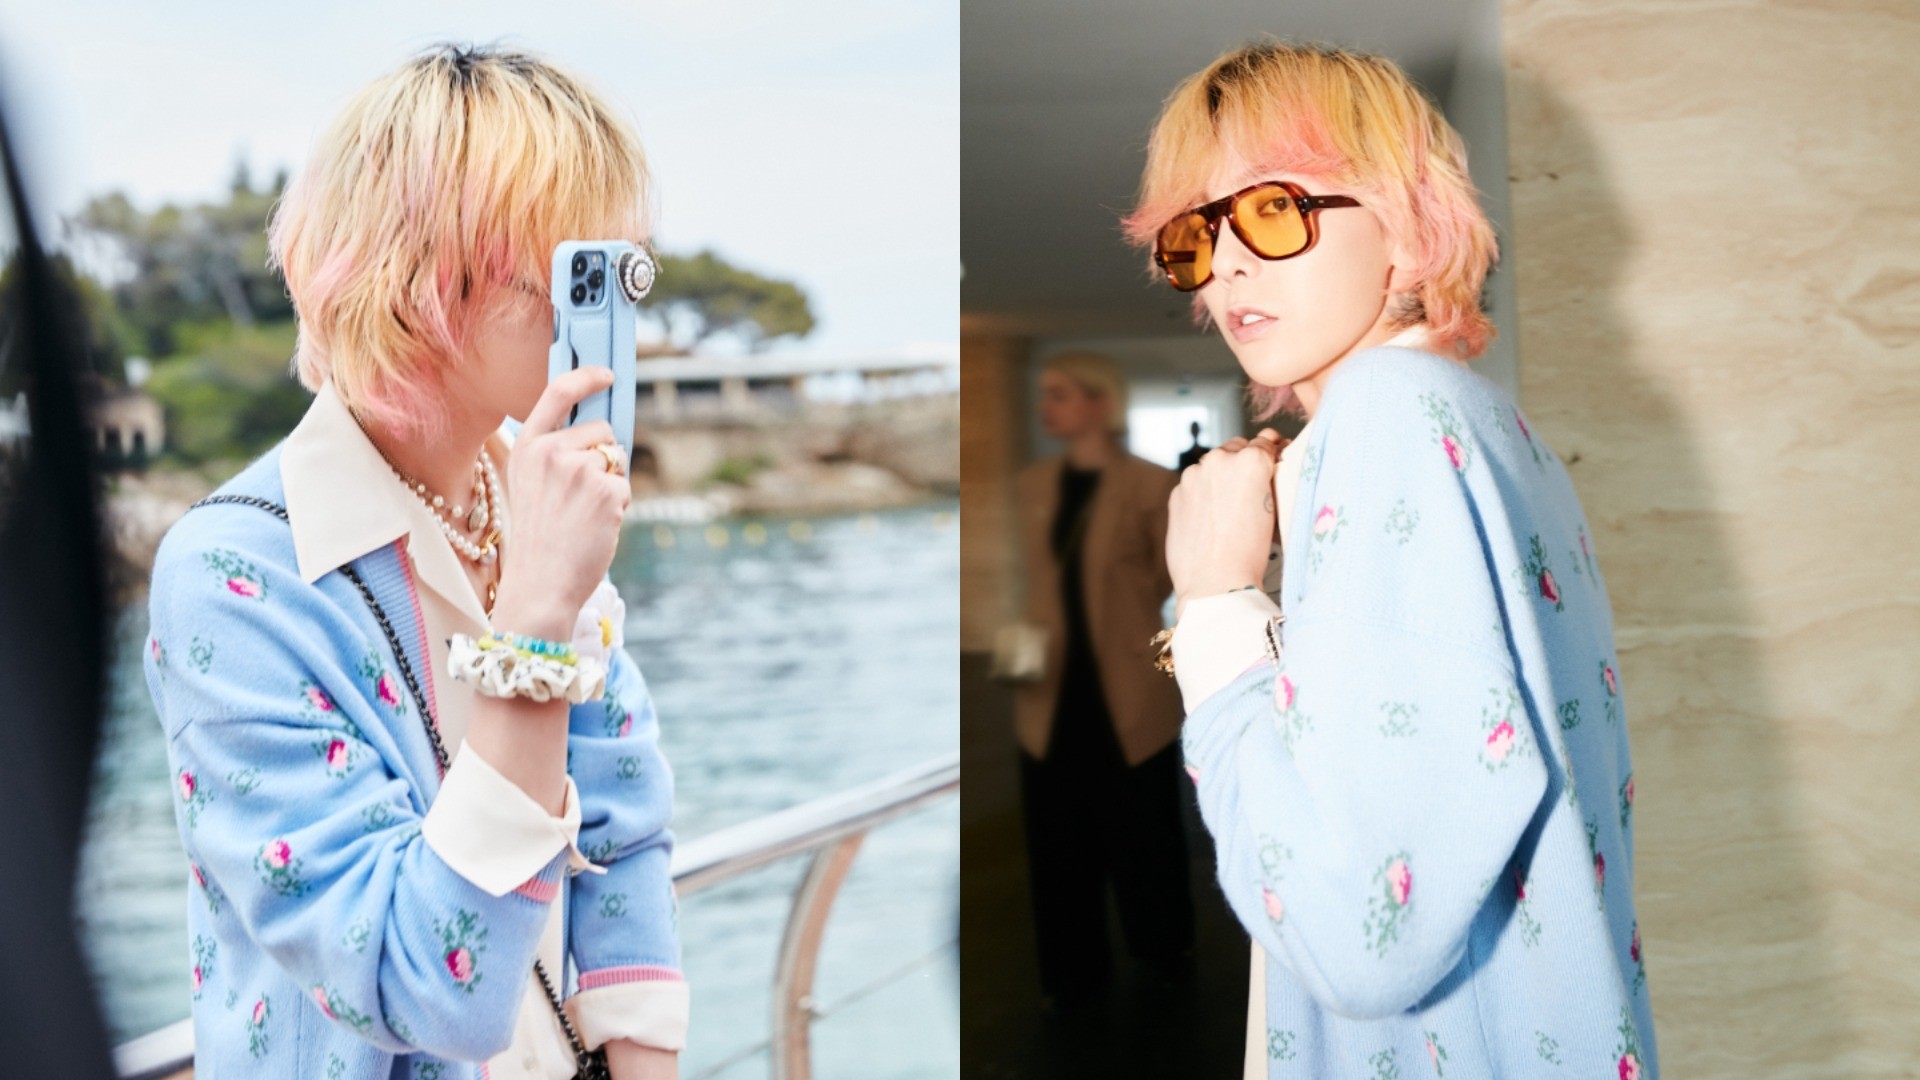 g dragon for chanel